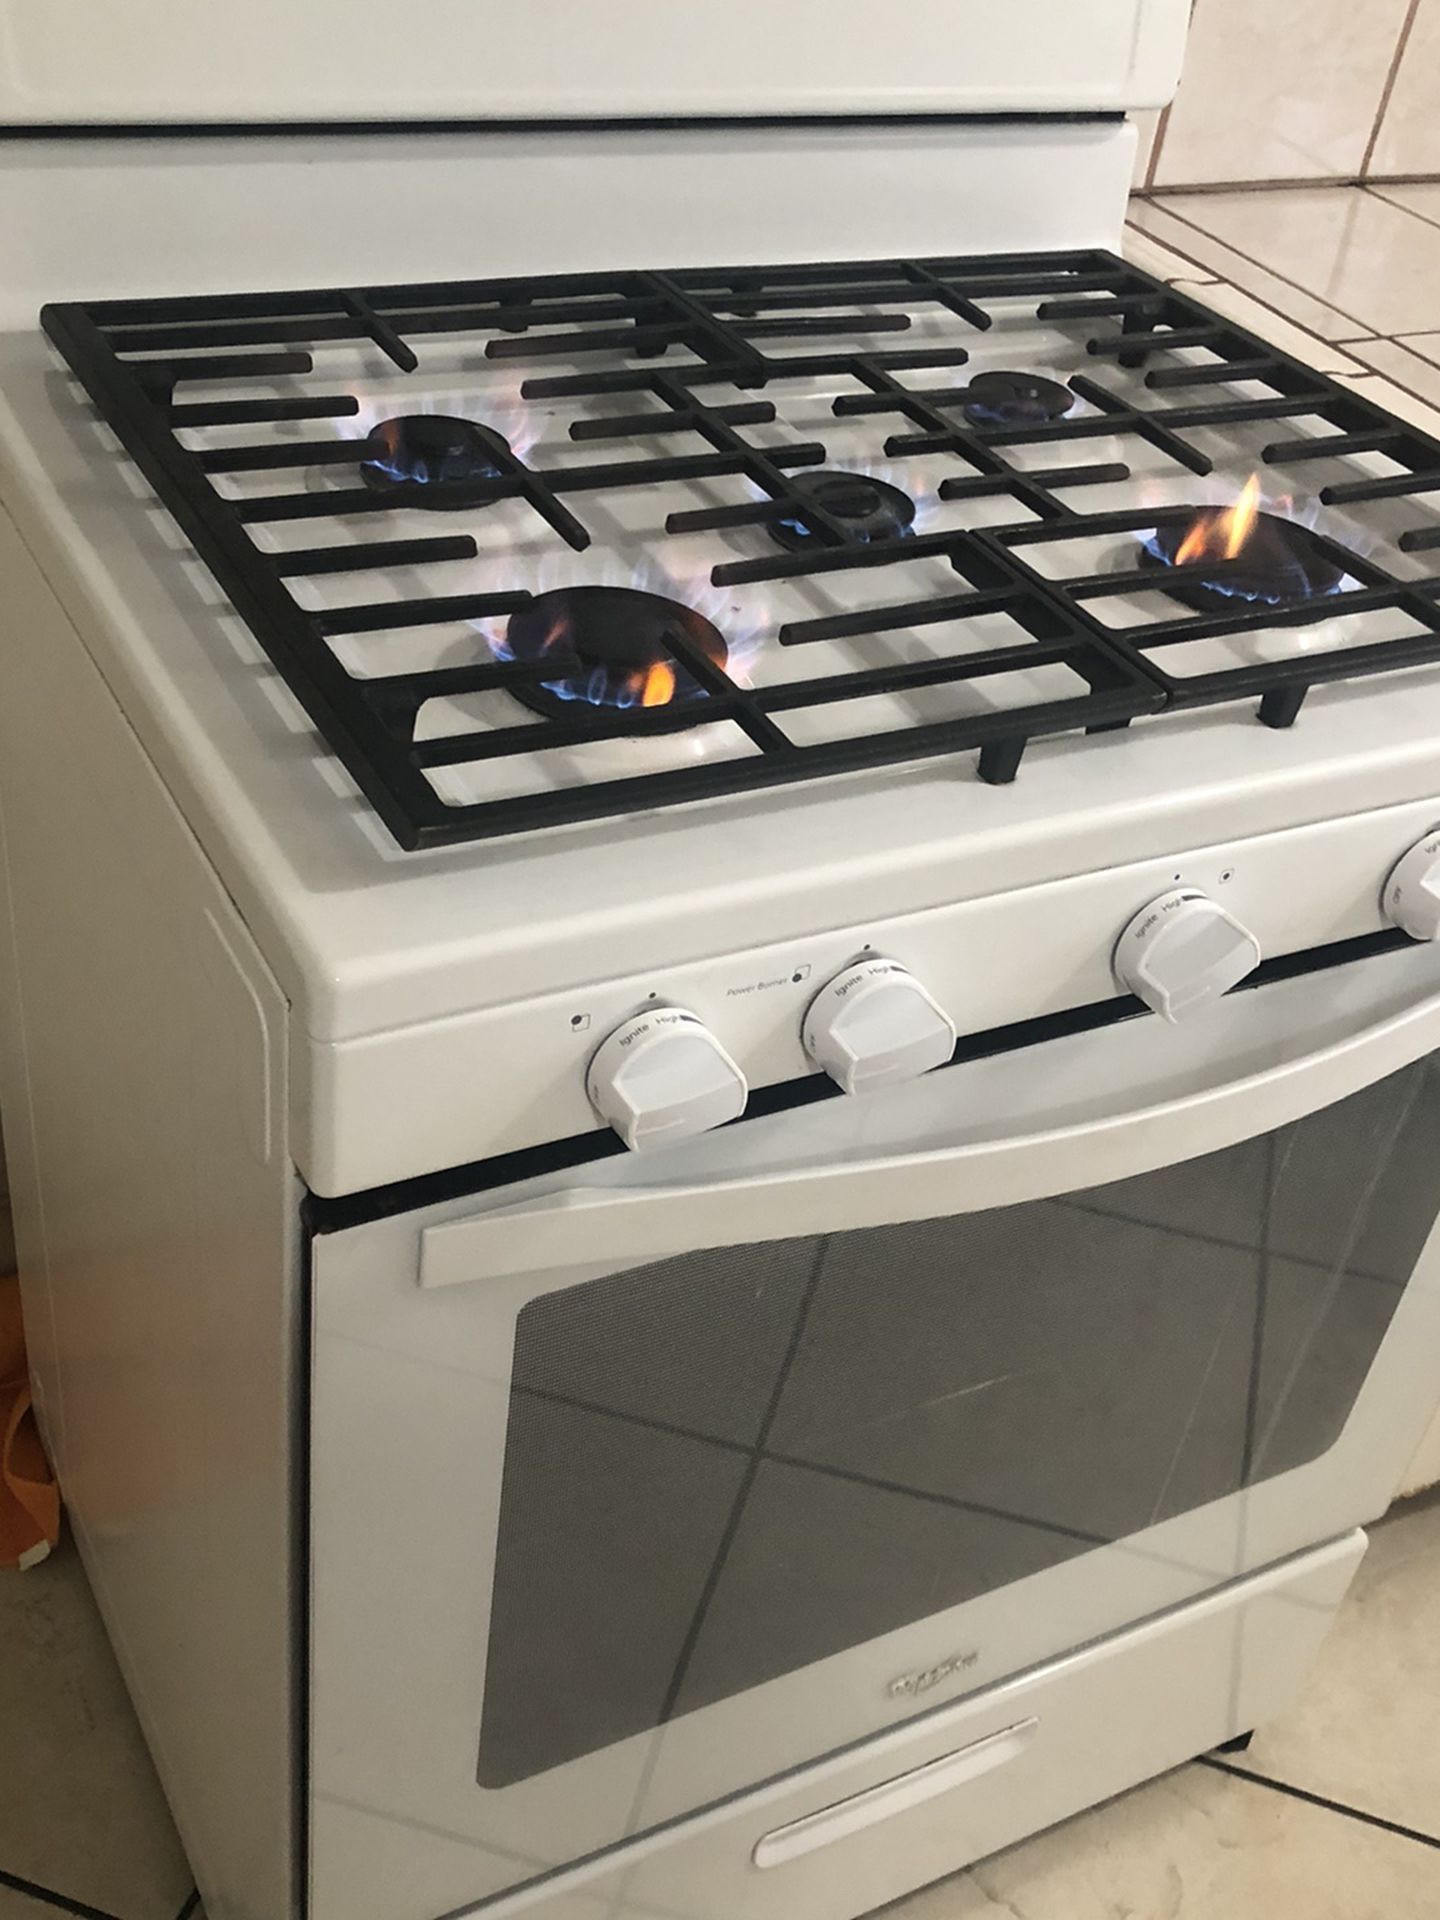 Whirlpool 5 Burner Range Gas Stove and Oven With Extra Griddle Please Read